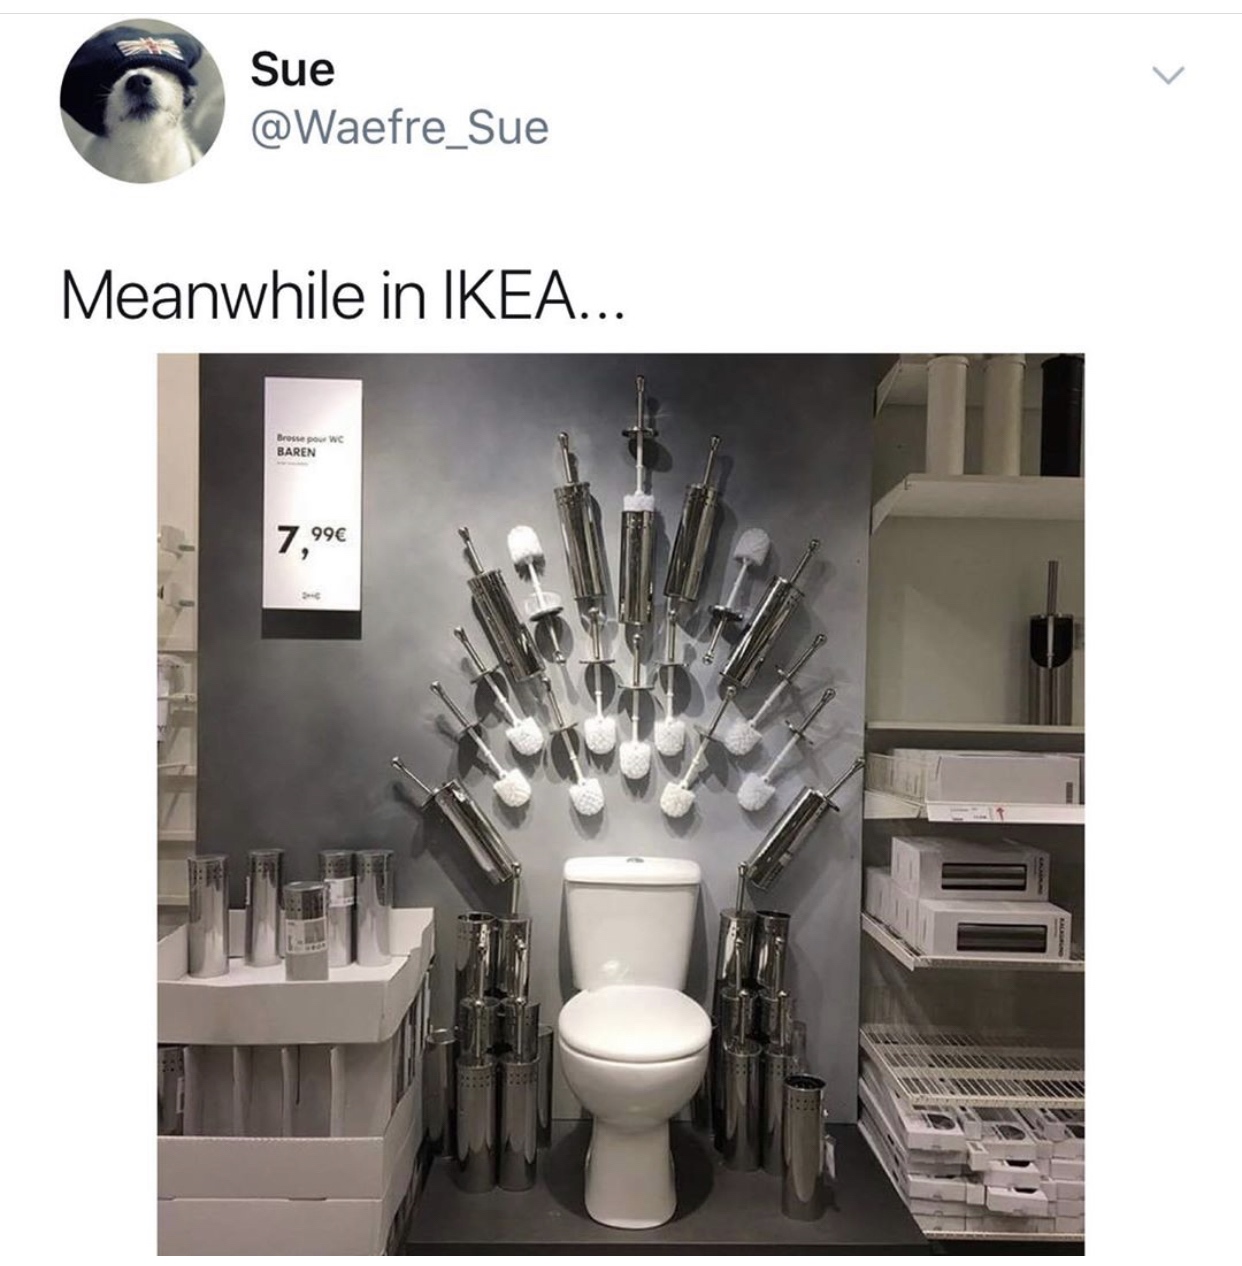 ikea throne - Sue Meanwhile in Ikea... Brosse pour Wc Baren 7.99